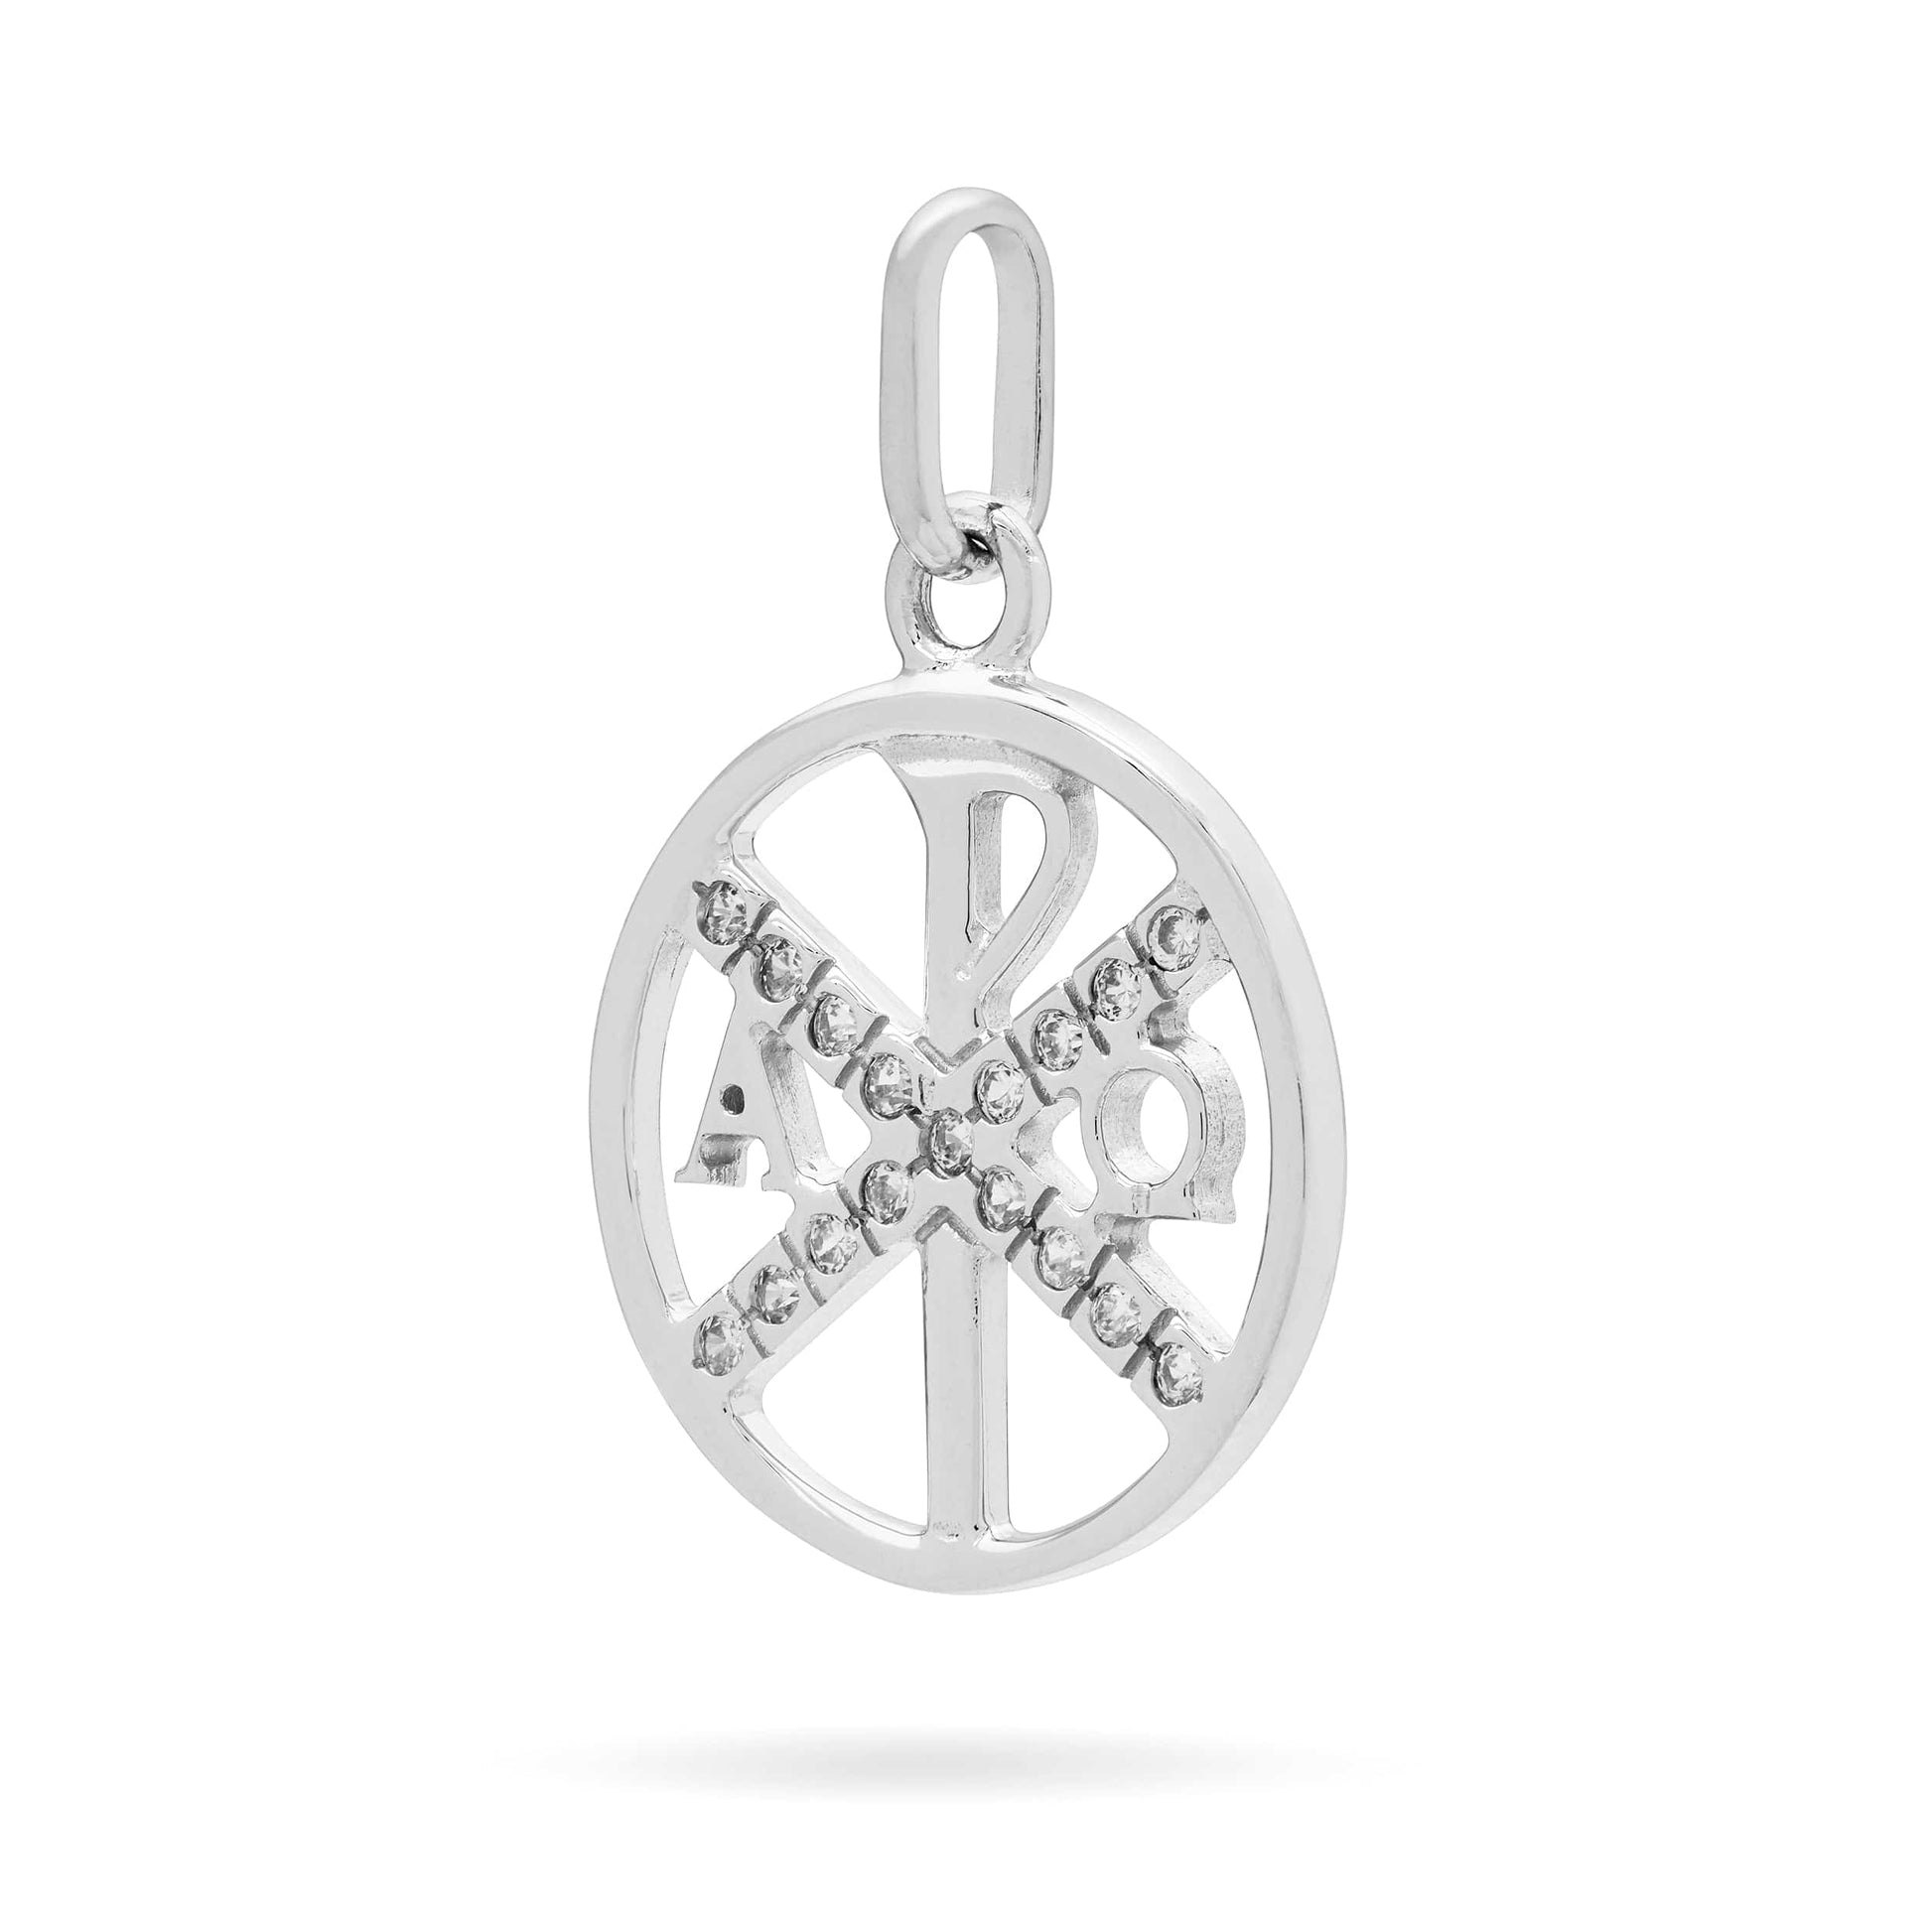 MONDO CATTOLICO 16 mm (0.63 in) White Gold Peace Cross Medal with Crystals